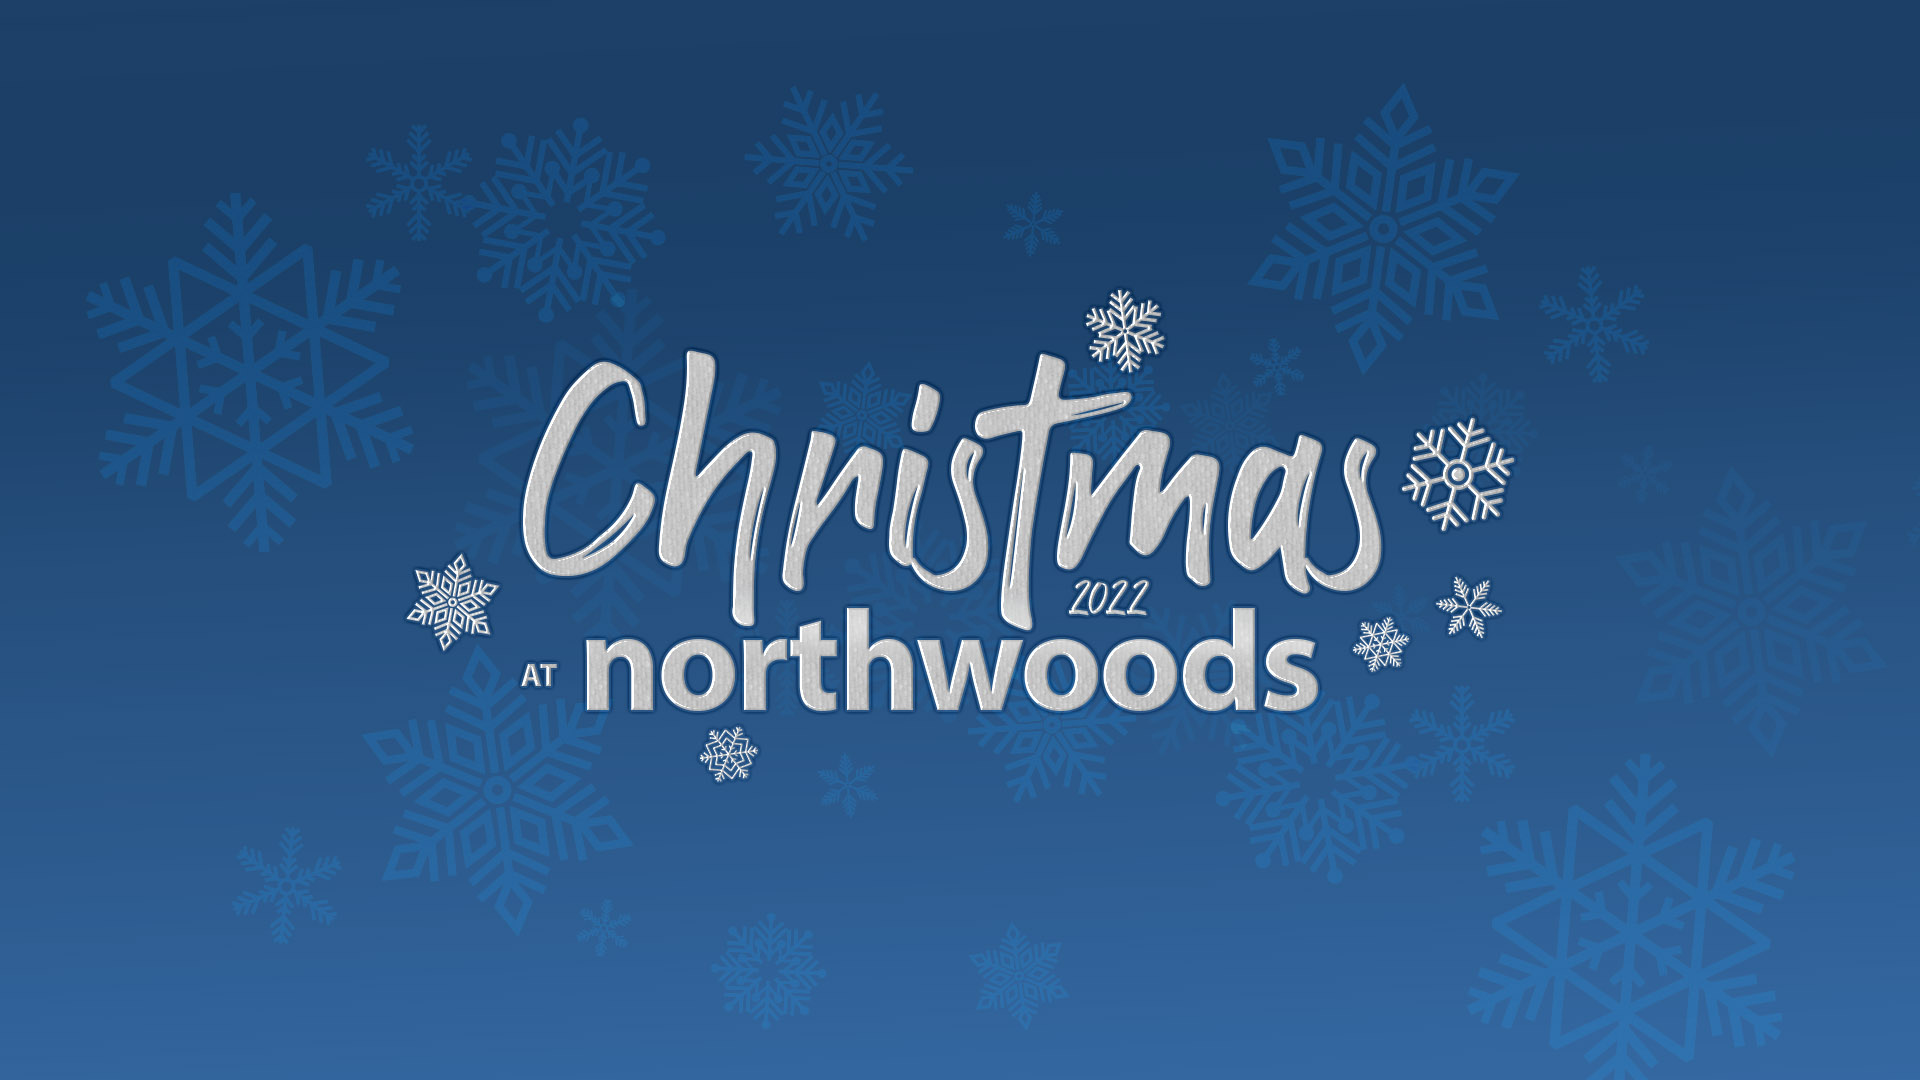 Christmas at Northwoods 2022